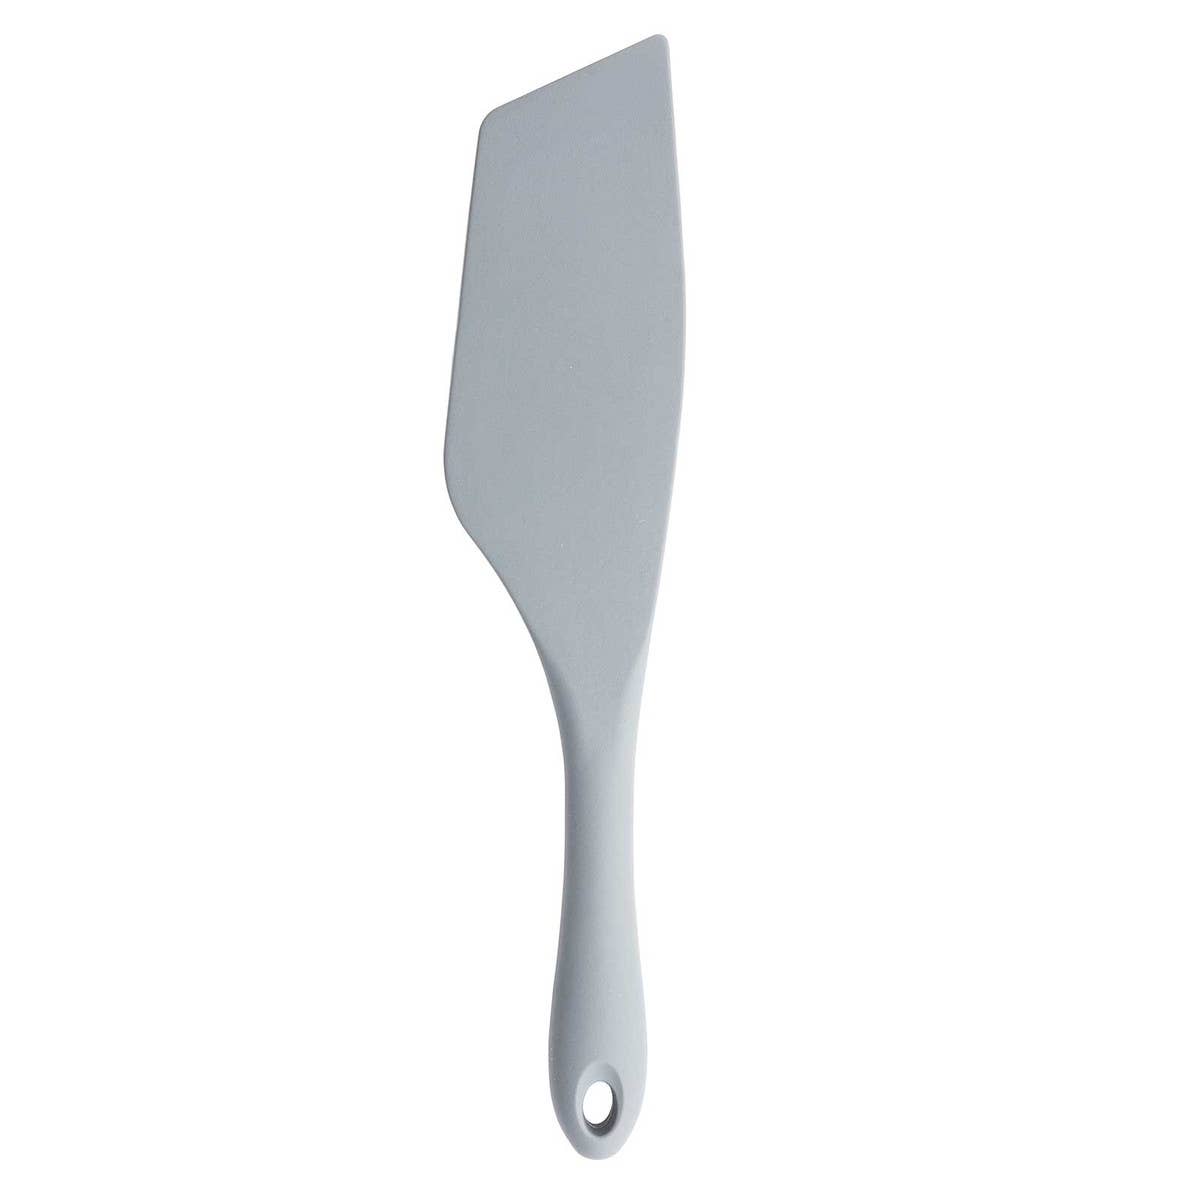 Angled Spurtle Spatula made with high-heat, food-safe silicone in grey. 